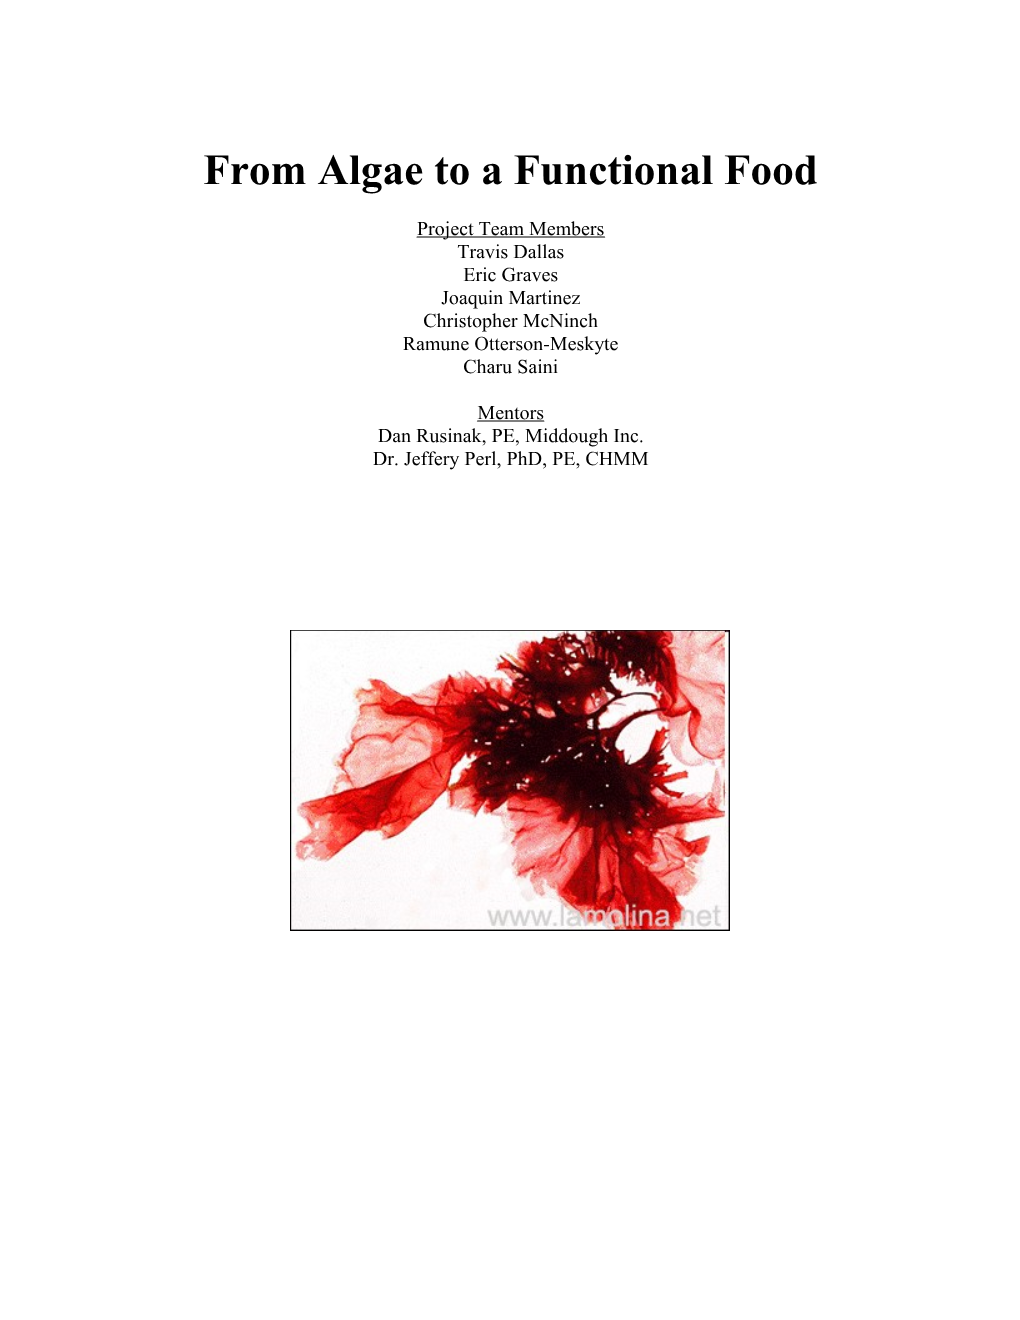 From Algae to a Functional Food